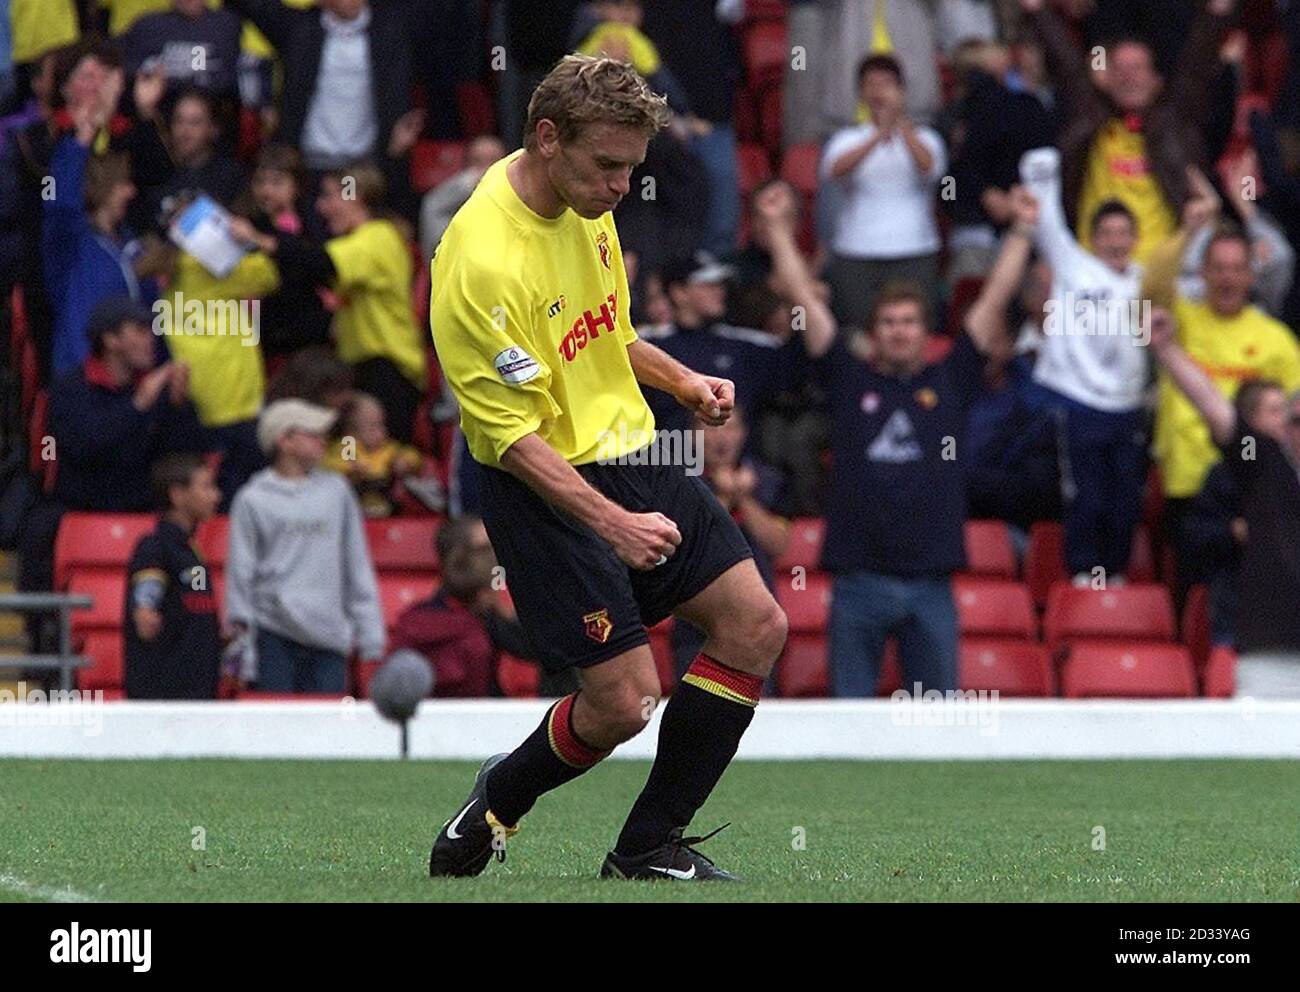 Watfords Alain Nielsen celebrates scoring thier 4th goal during the Nationwide Division One match at Watford's Vicarage Road ground. Stock Photo